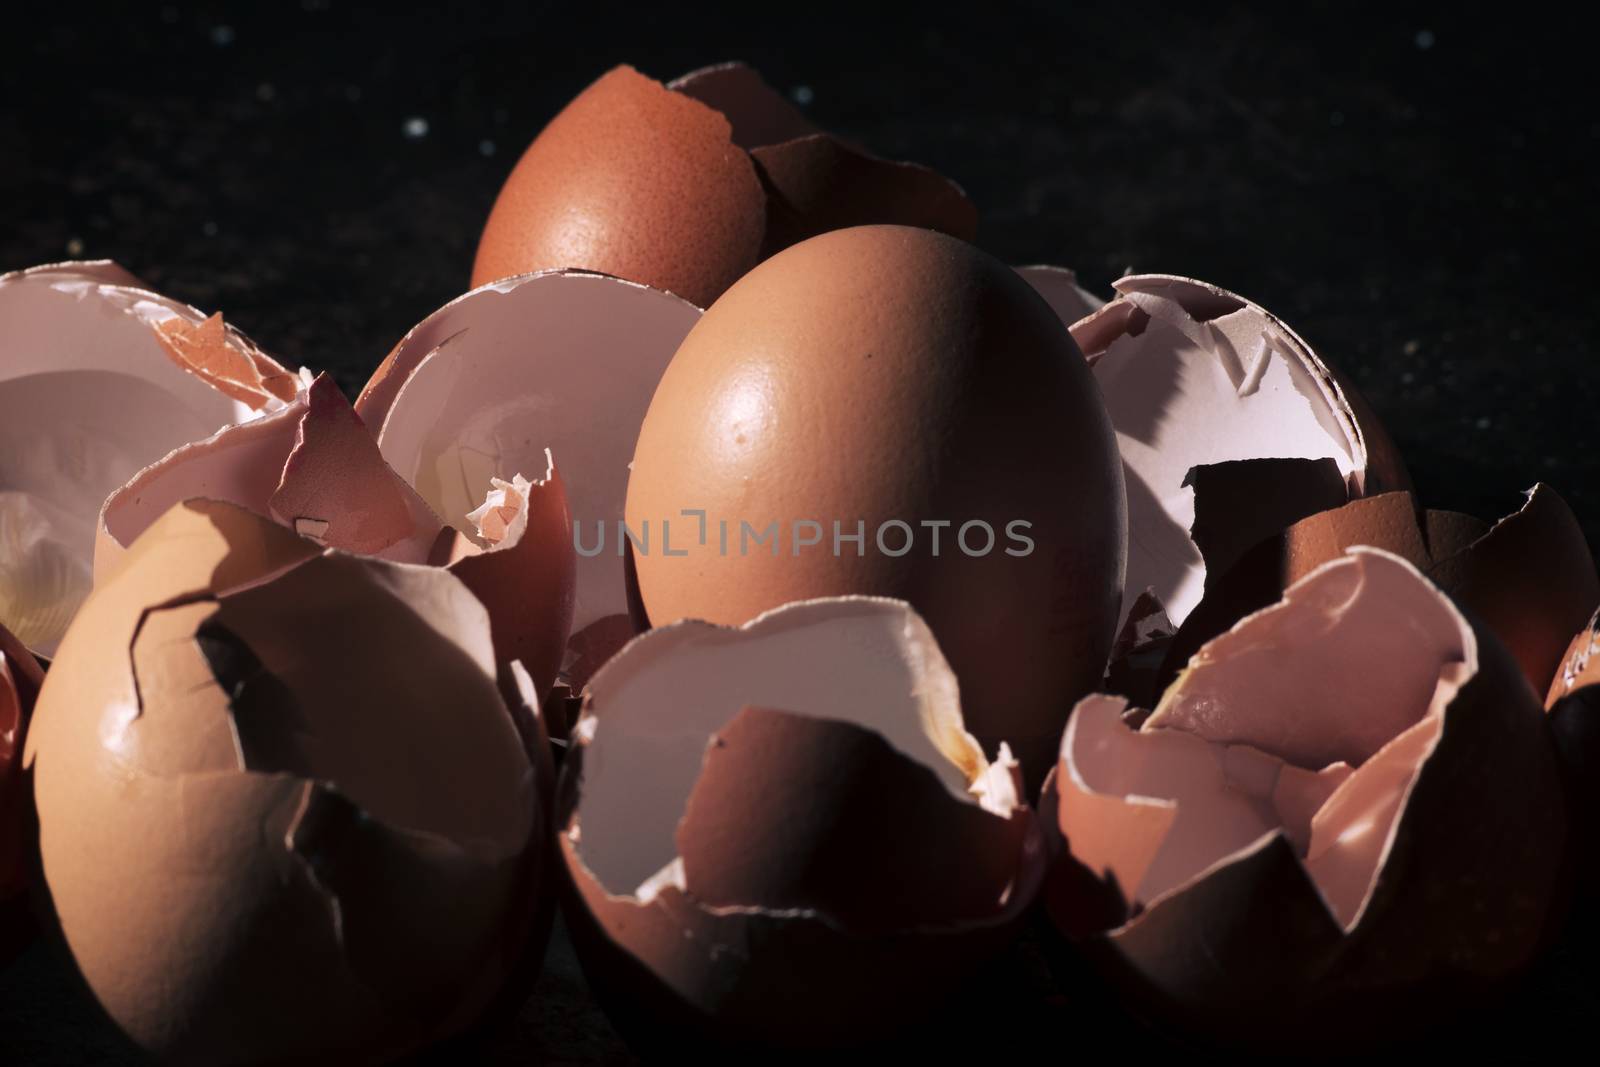 Bunch of eggs whole and crushed shells by artistrobd